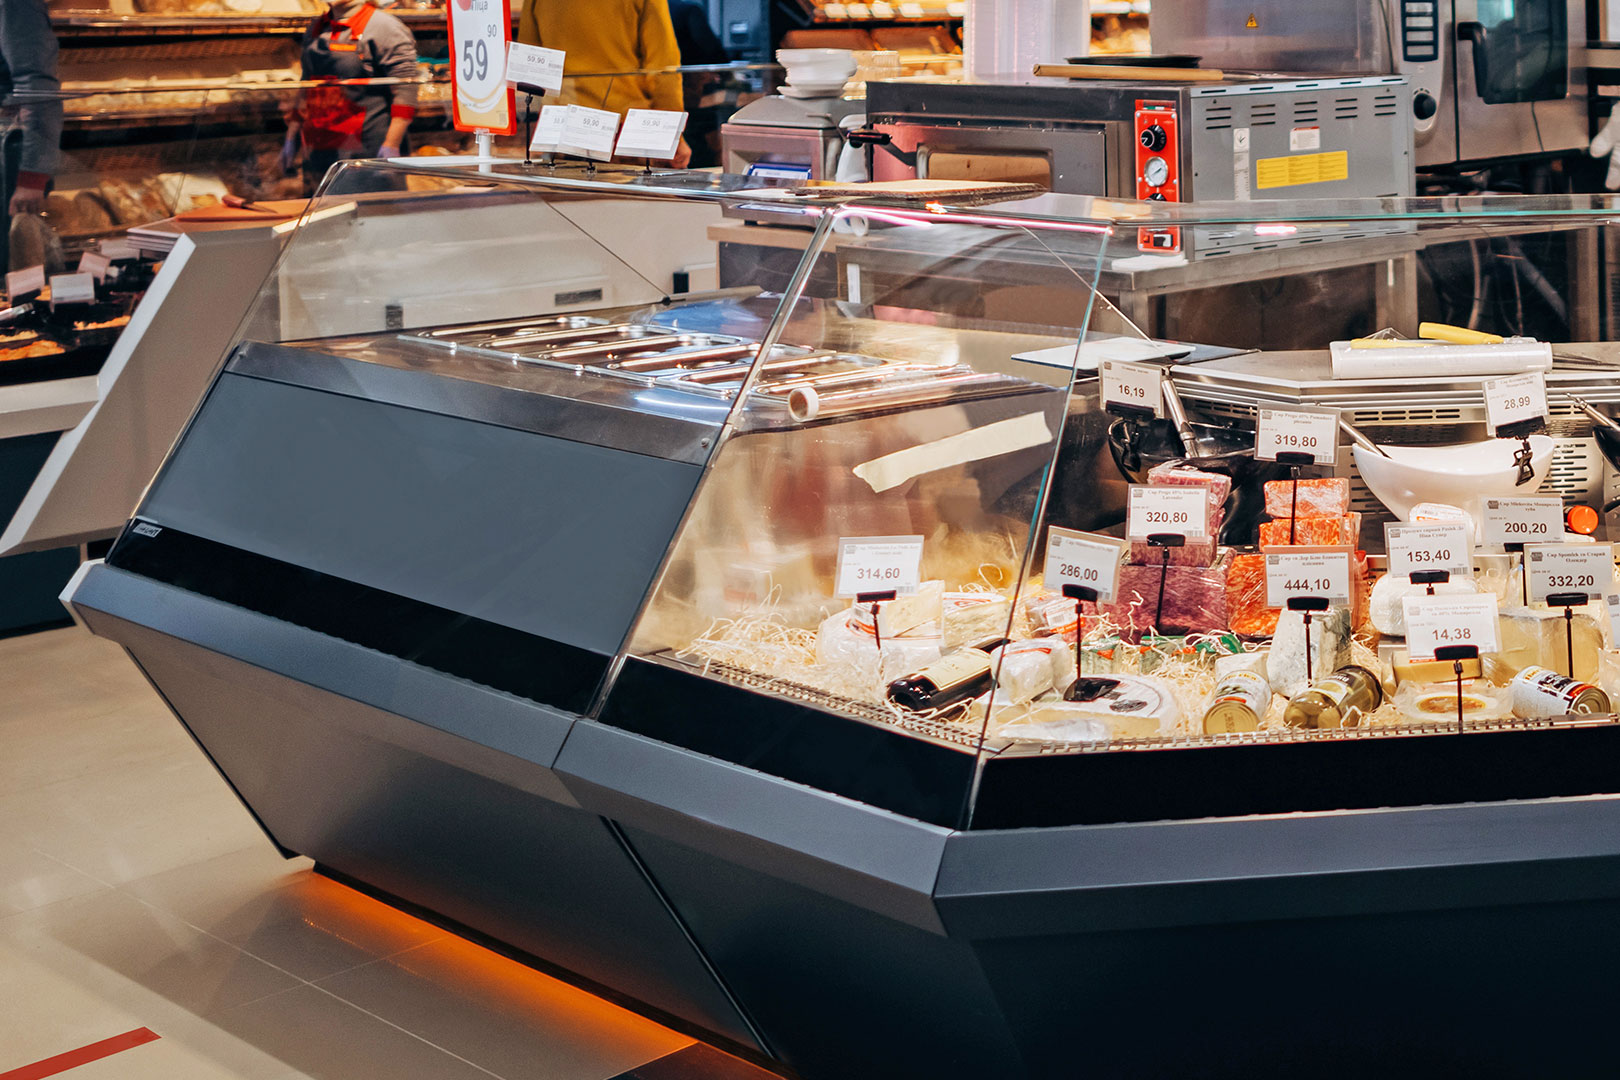 Specialized counter for cooking and sales of sushi and pizza Missouri enigma MK 120 sushi/pizza OS M, supermarket Nash Kraii